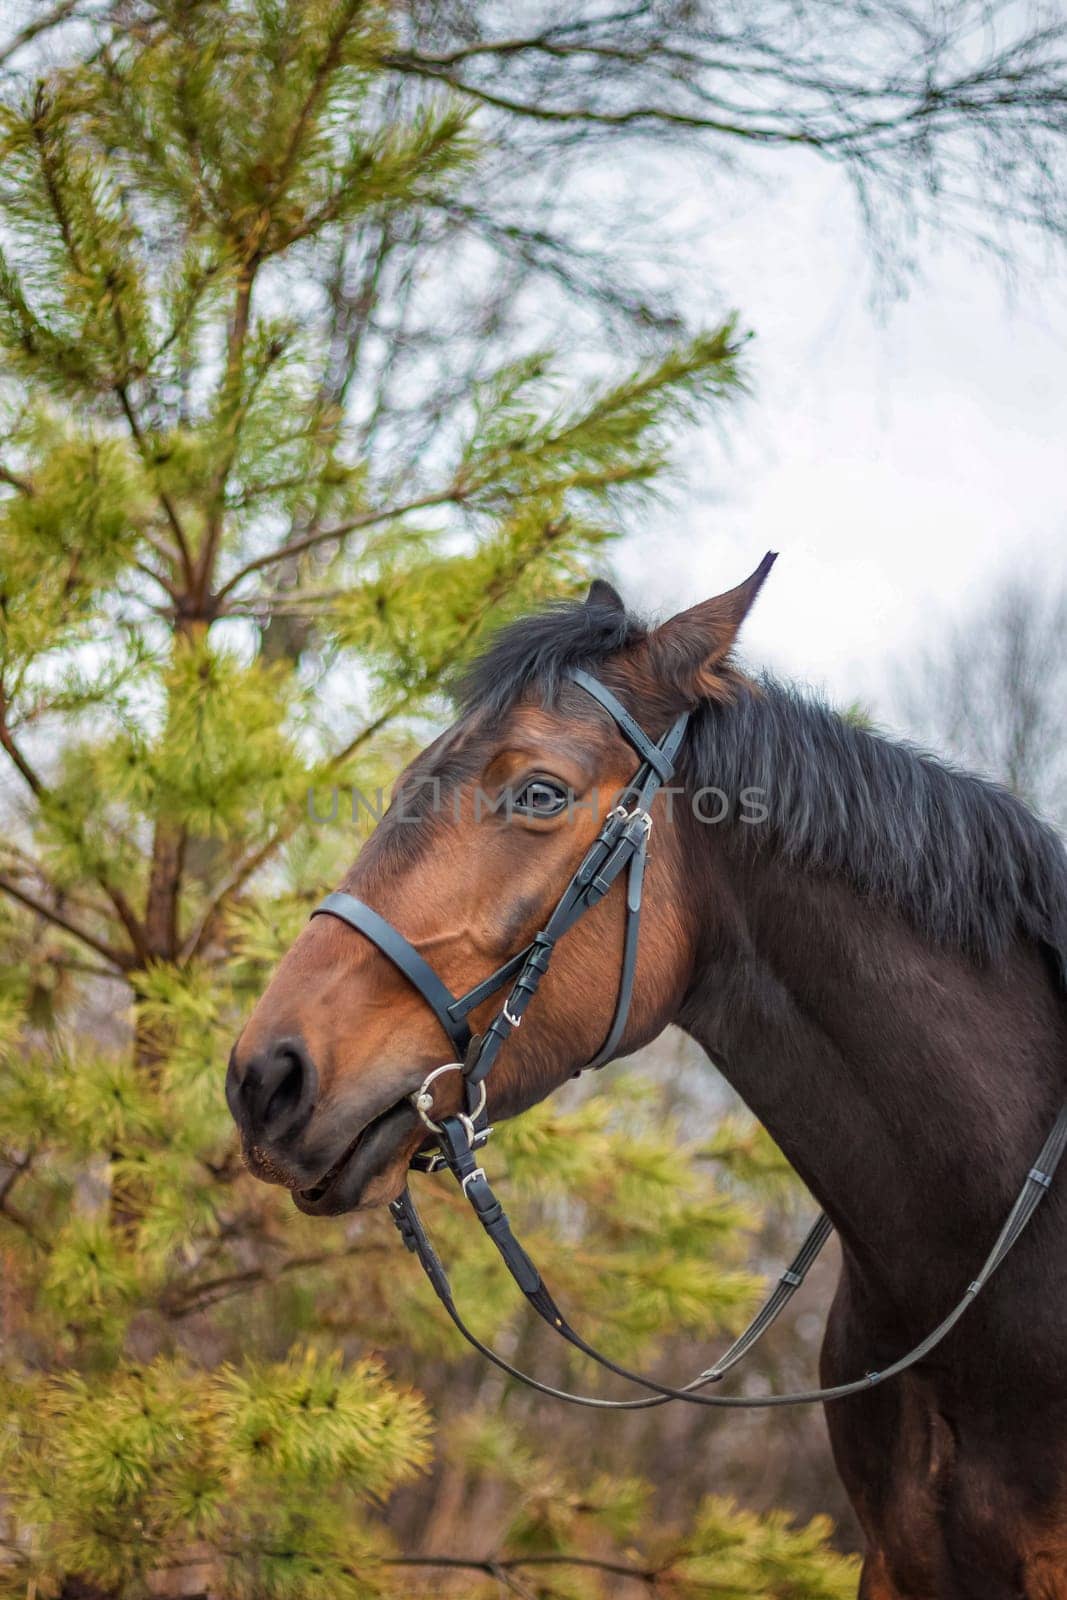 A horse of a standard breed of dark brown color, four-legged animals used for harness racing, a breed of horses for trotting, a close-up portrait. greenery in the background.